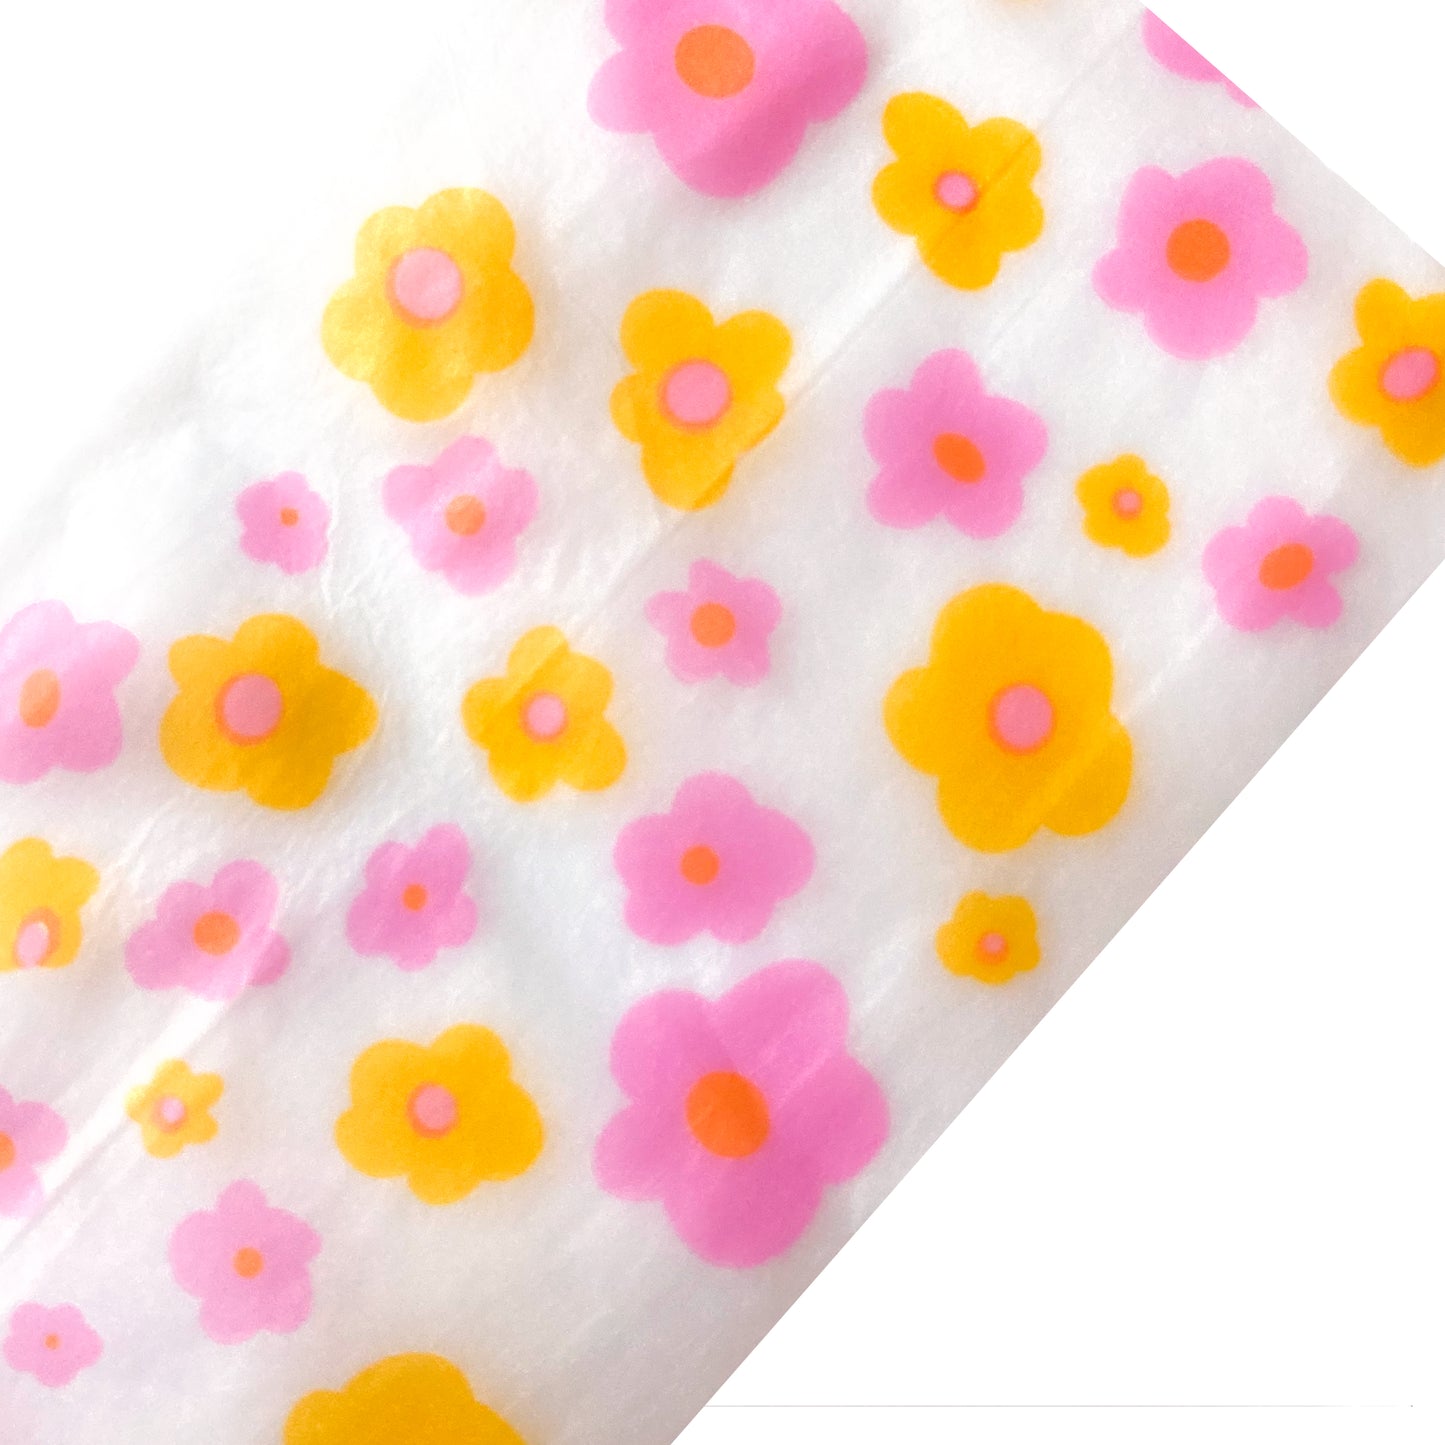 The Lucky Papers: purple and orange floral papers. These designer rolling papers are girly, pretty, vegan, cute, cool, standard size, high quality, even burn, natural dyes, best tasting, slow burn.